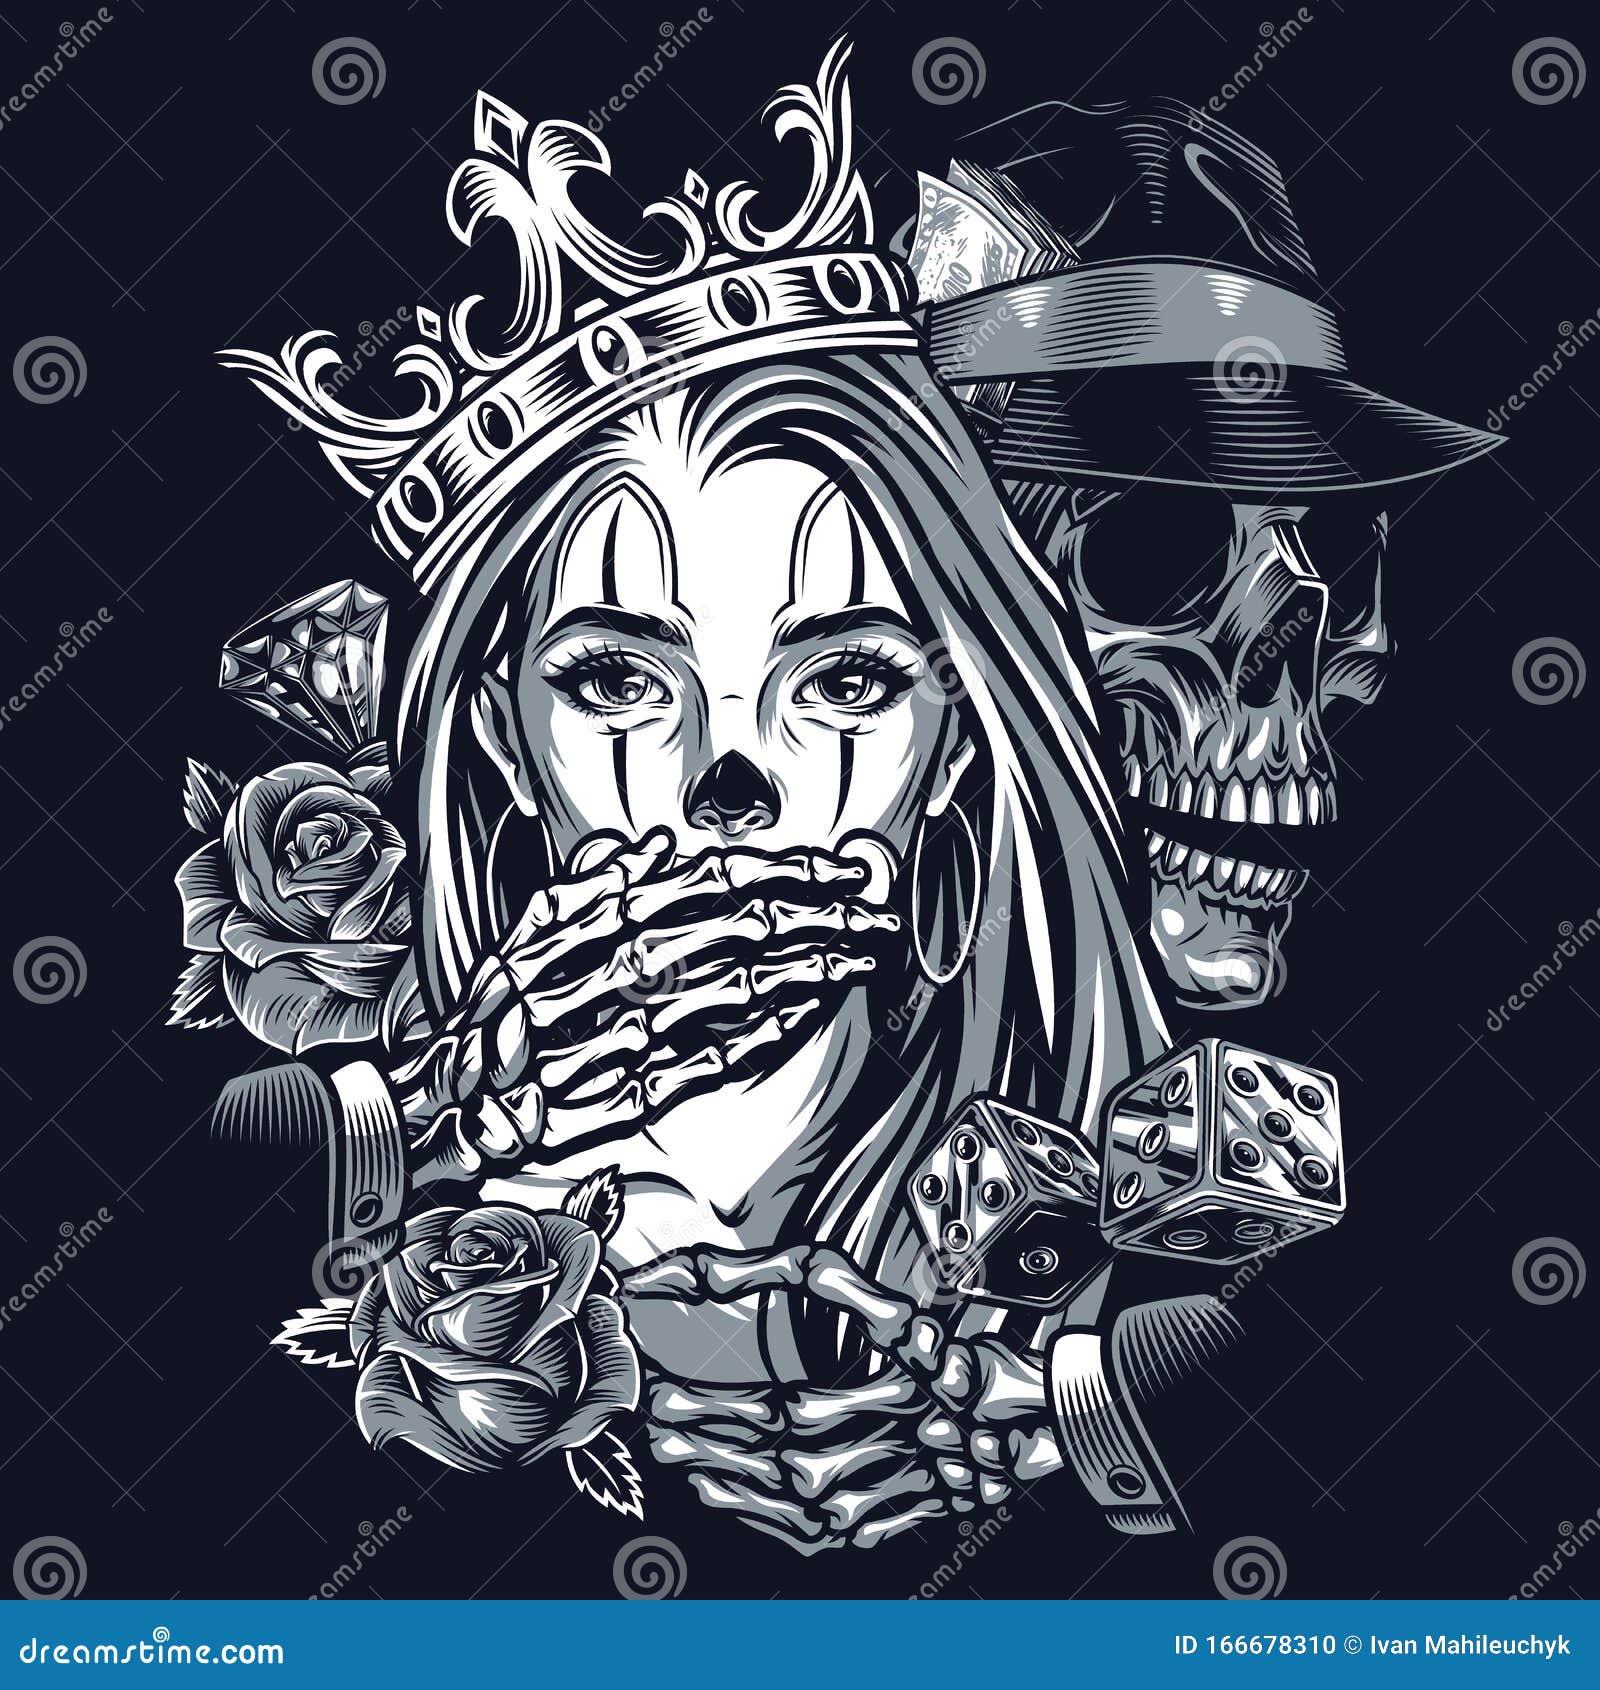 Chicano Style Tattoo Vintage Concept Stock Vector - Illustration of ...